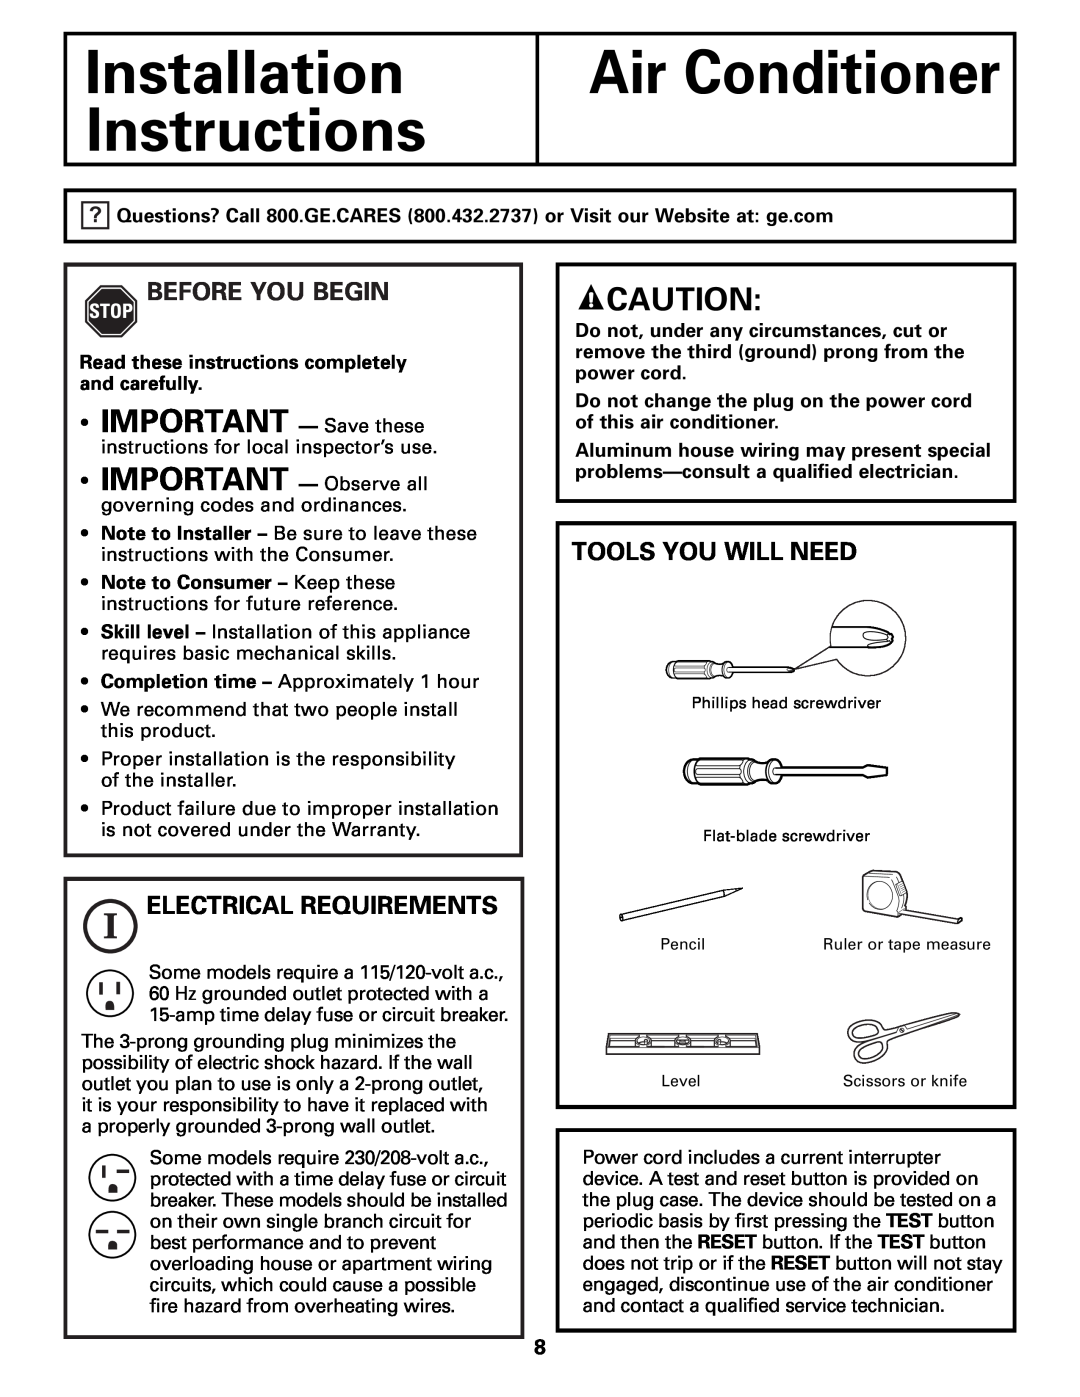 GE AET05 Installation Instructions, Air Conditioner, IMPORTANT - Save these, Before You Begin, Electrical Requirements 